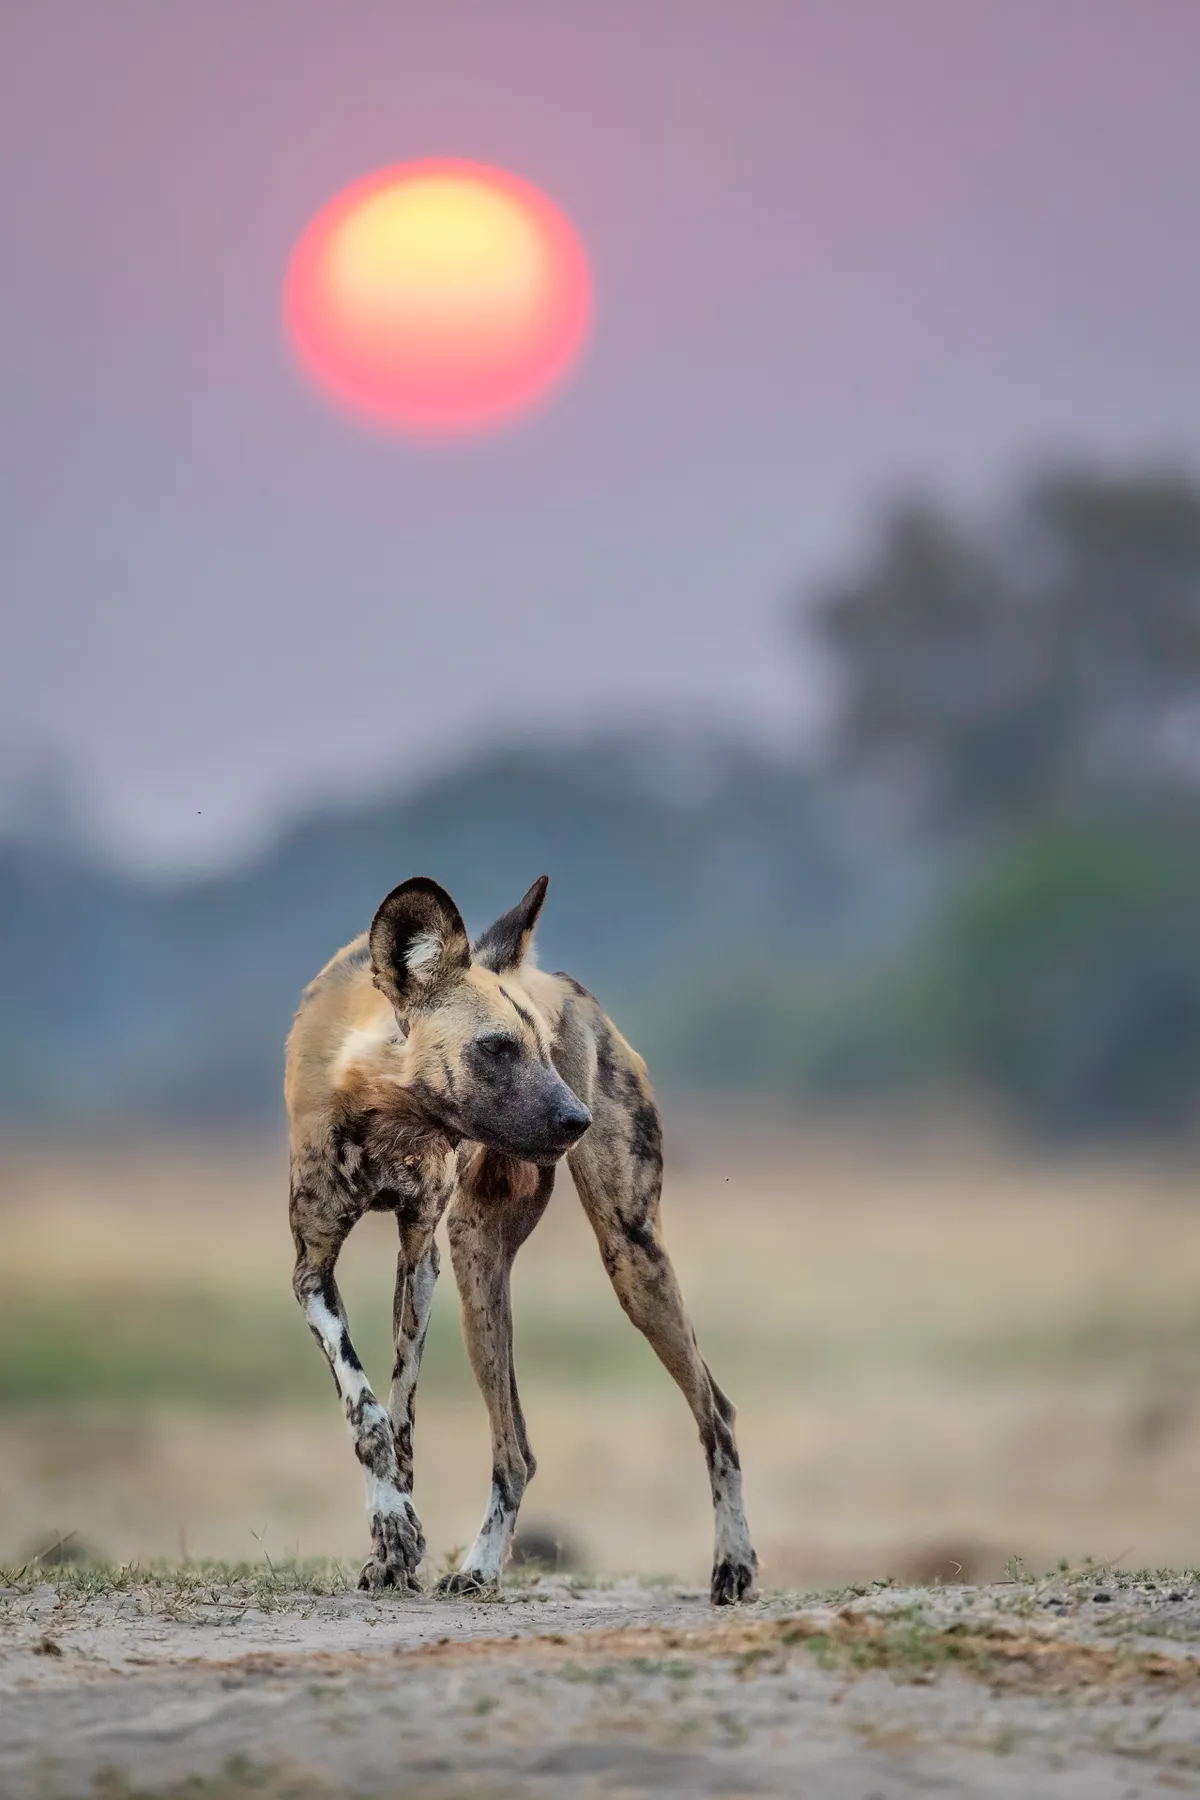 An African wild dog, with white and grey dappled shins, pale brown coat and black muzzle, walks along a track. Directly above, the yellow sun is enveloped by a ring of red as it begins to set, turning the sky a pale purple, contrasting with the yellow and green trees and ground.